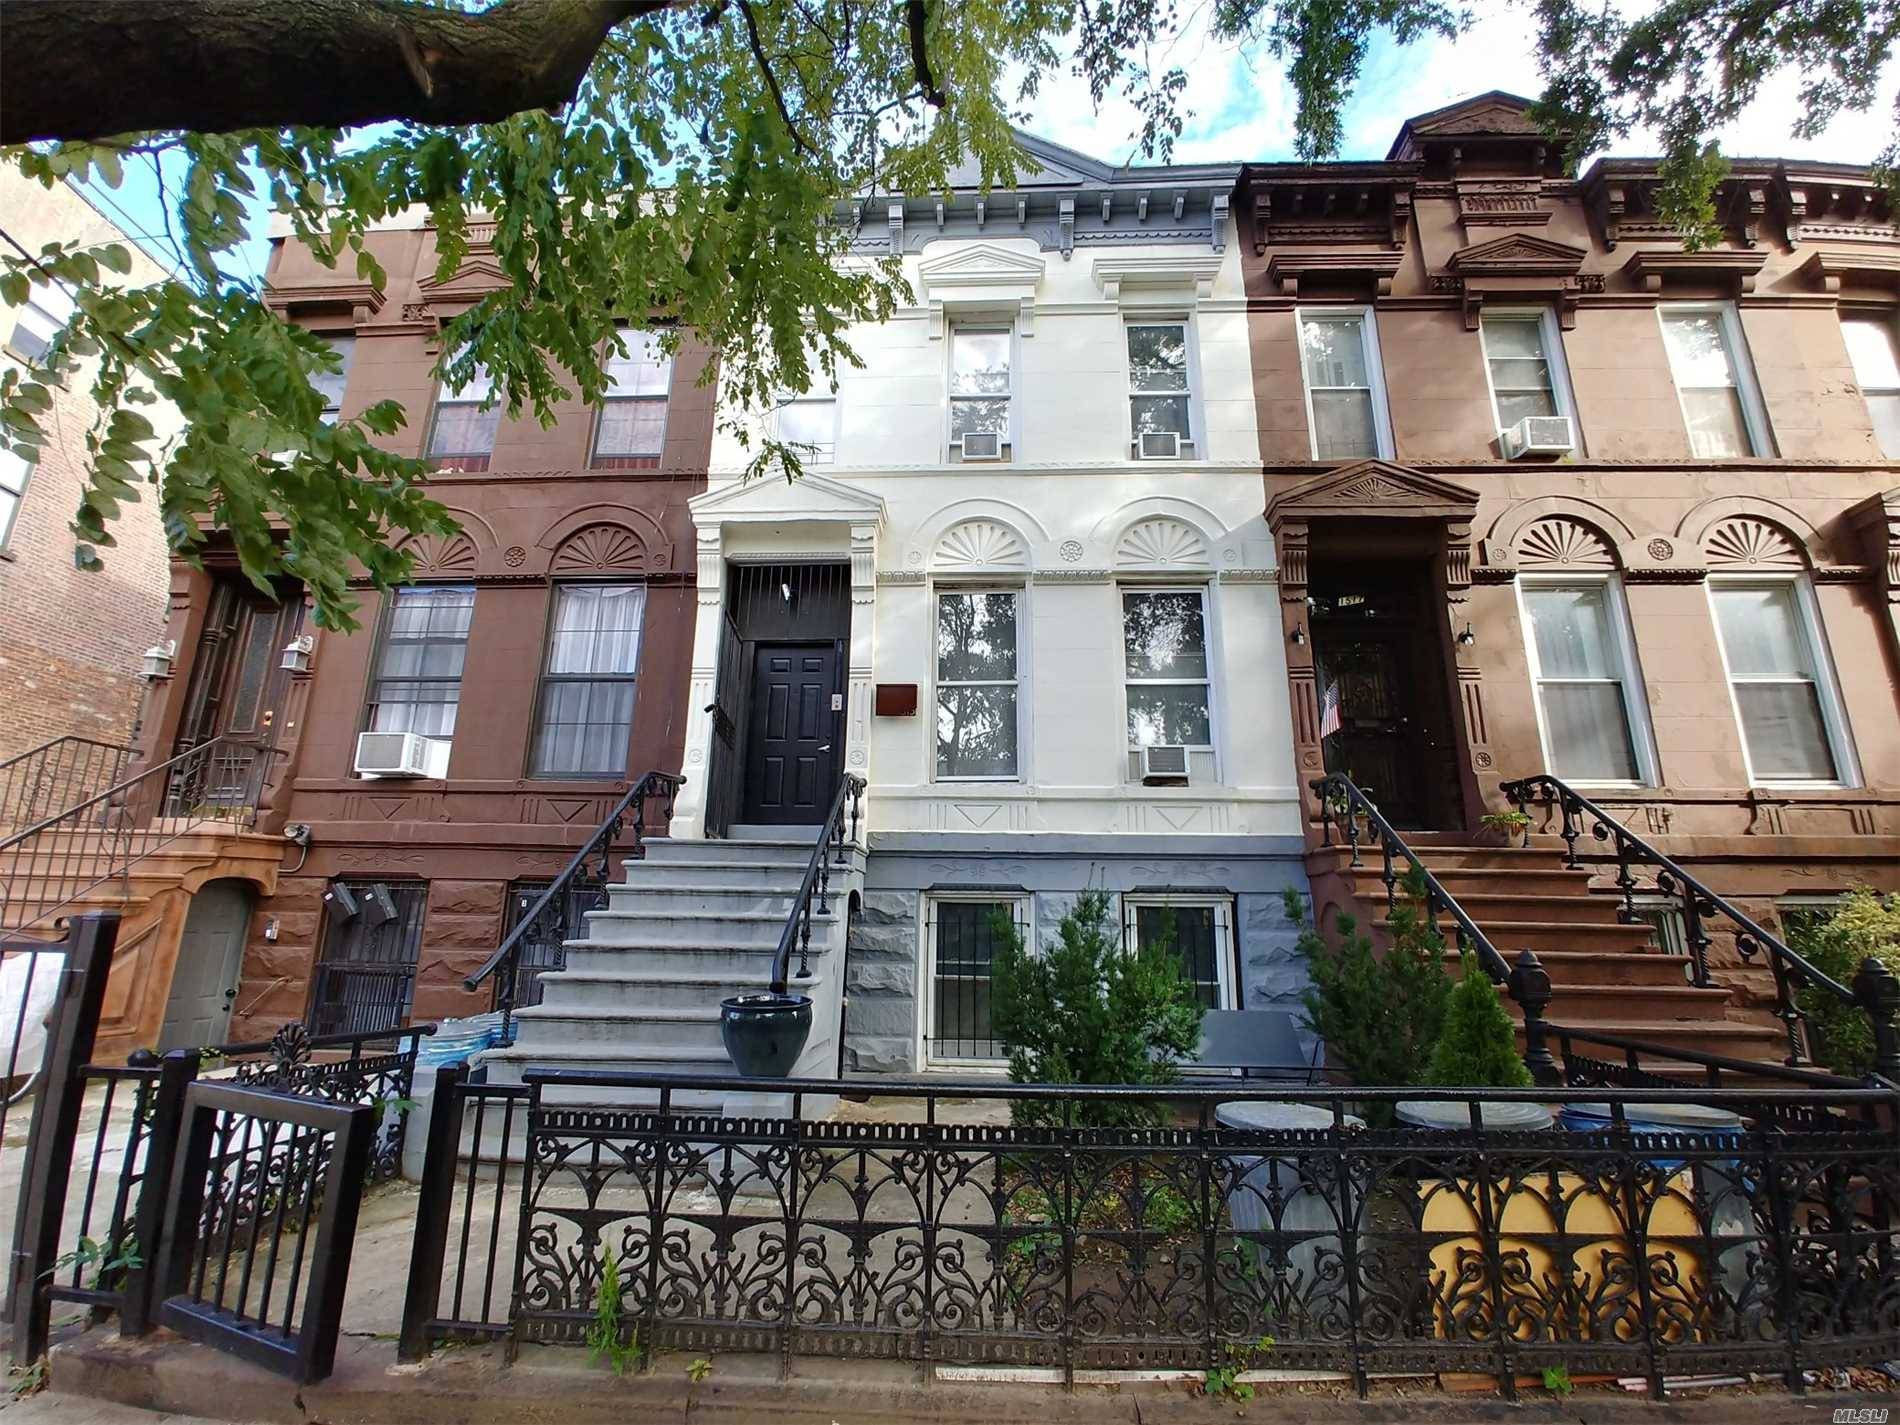 Renovated Well Maintained 2 Family Brownstone In The Historical District Of Crown Heights.